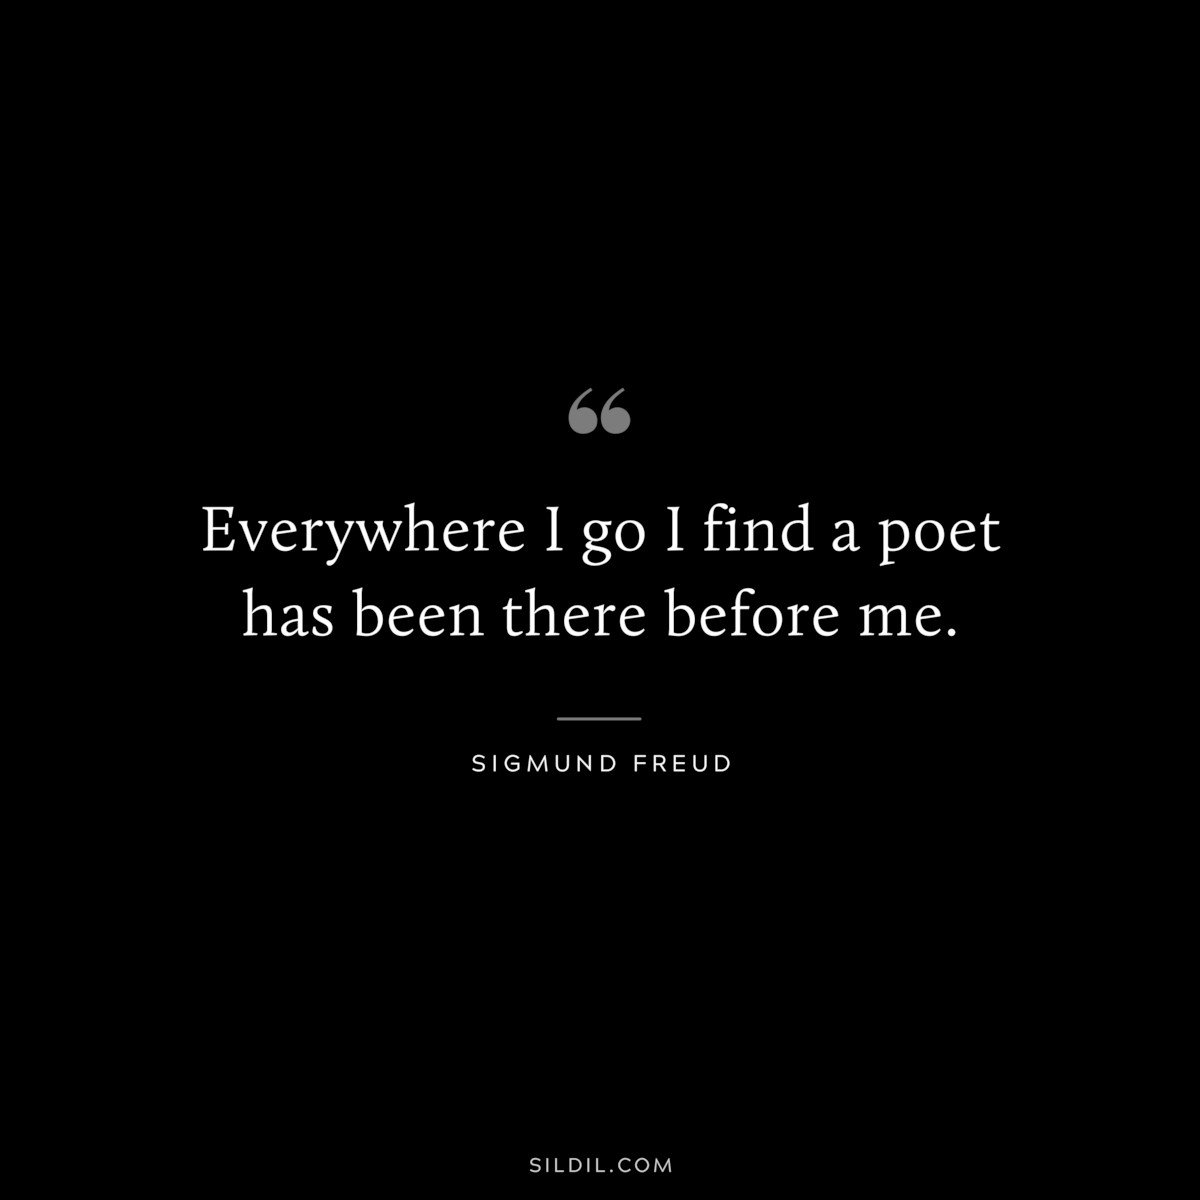 Everywhere I go I find a poet has been there before me. ― Sigmund Frued